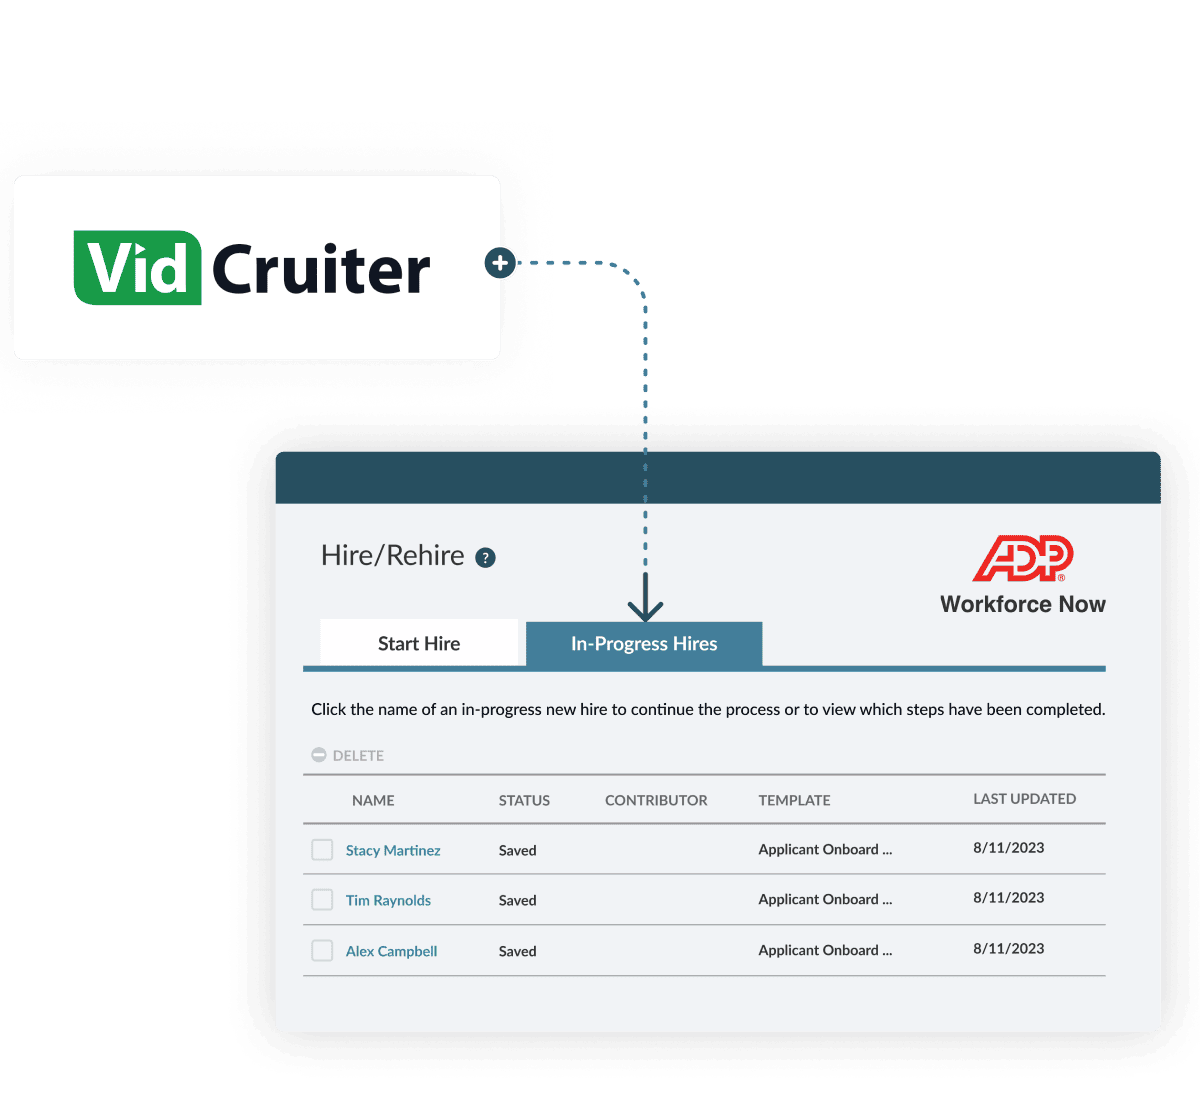 VidCruiter New Hire Connector for ADP Workforce Now